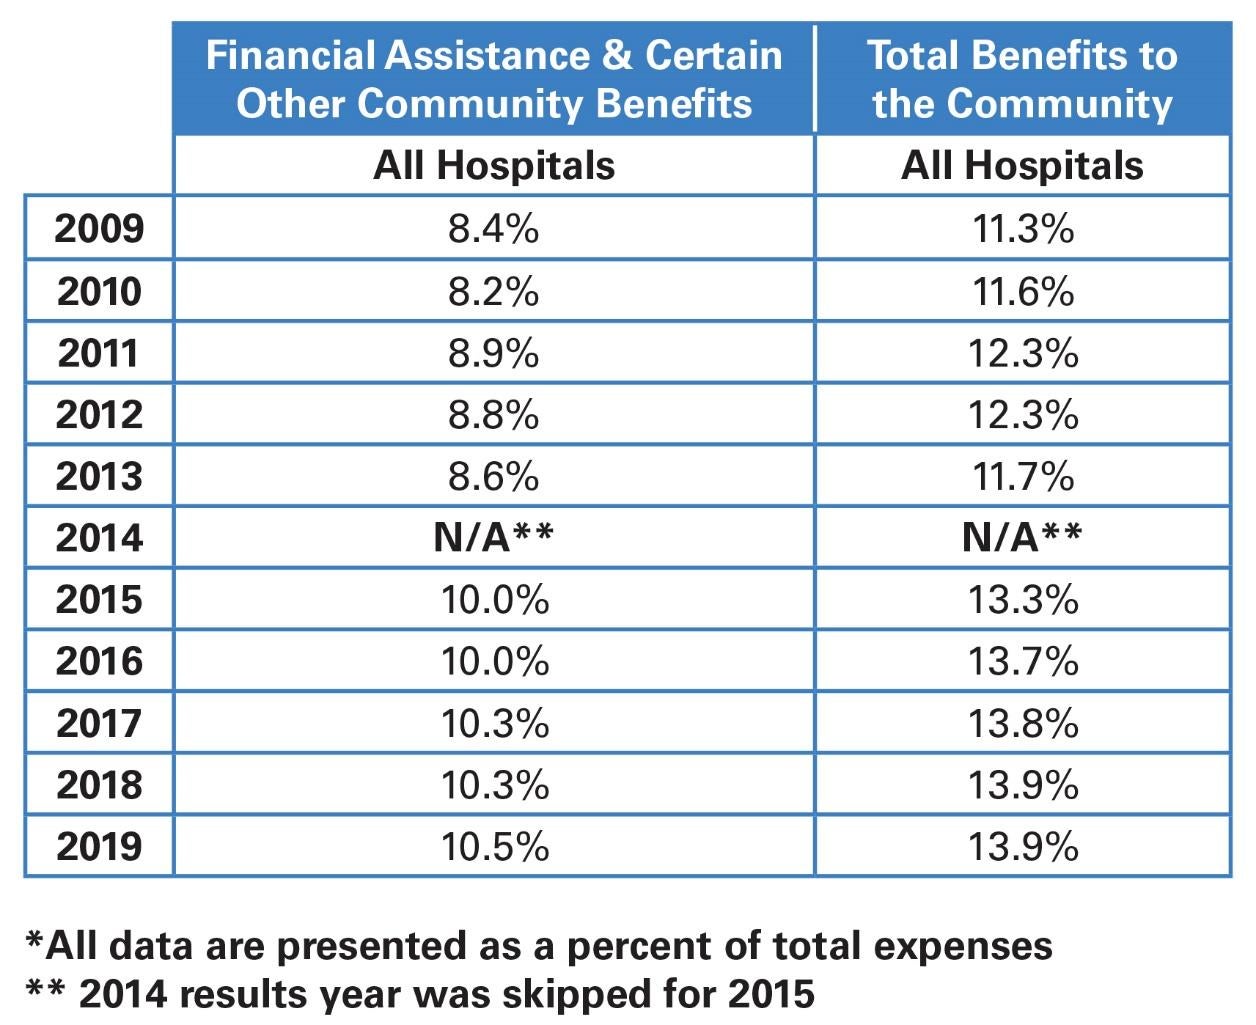 Chart 1: Financial Assistance & Certain Other Community Benefits and Total Benefits to the Community.